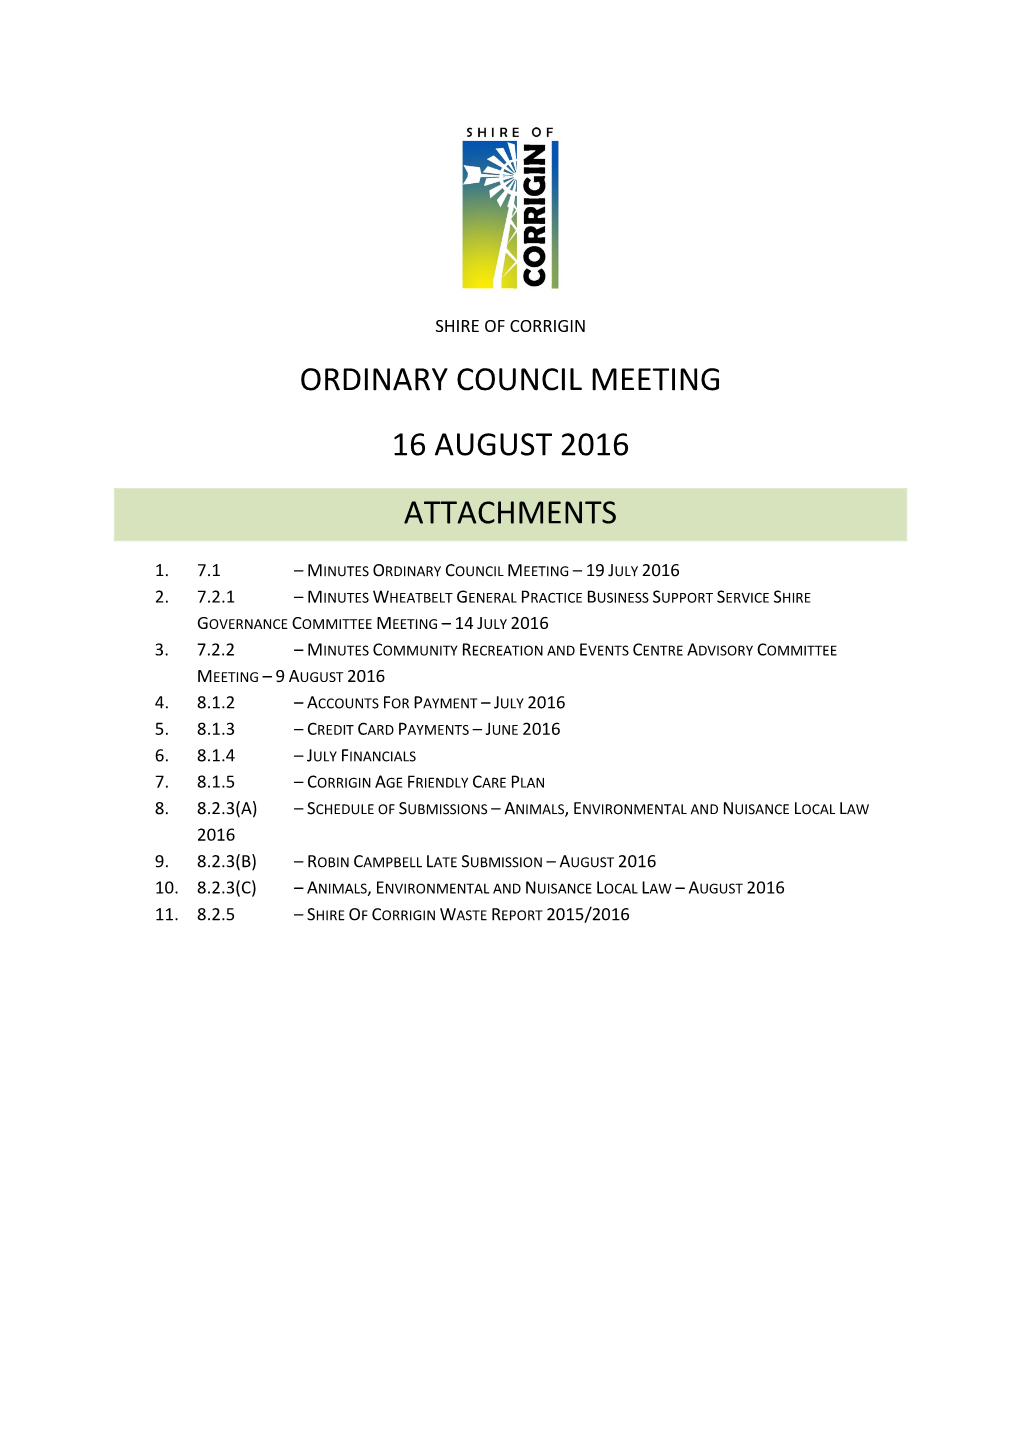 Ordinary Council Meeting 16 August 2016 Attachments